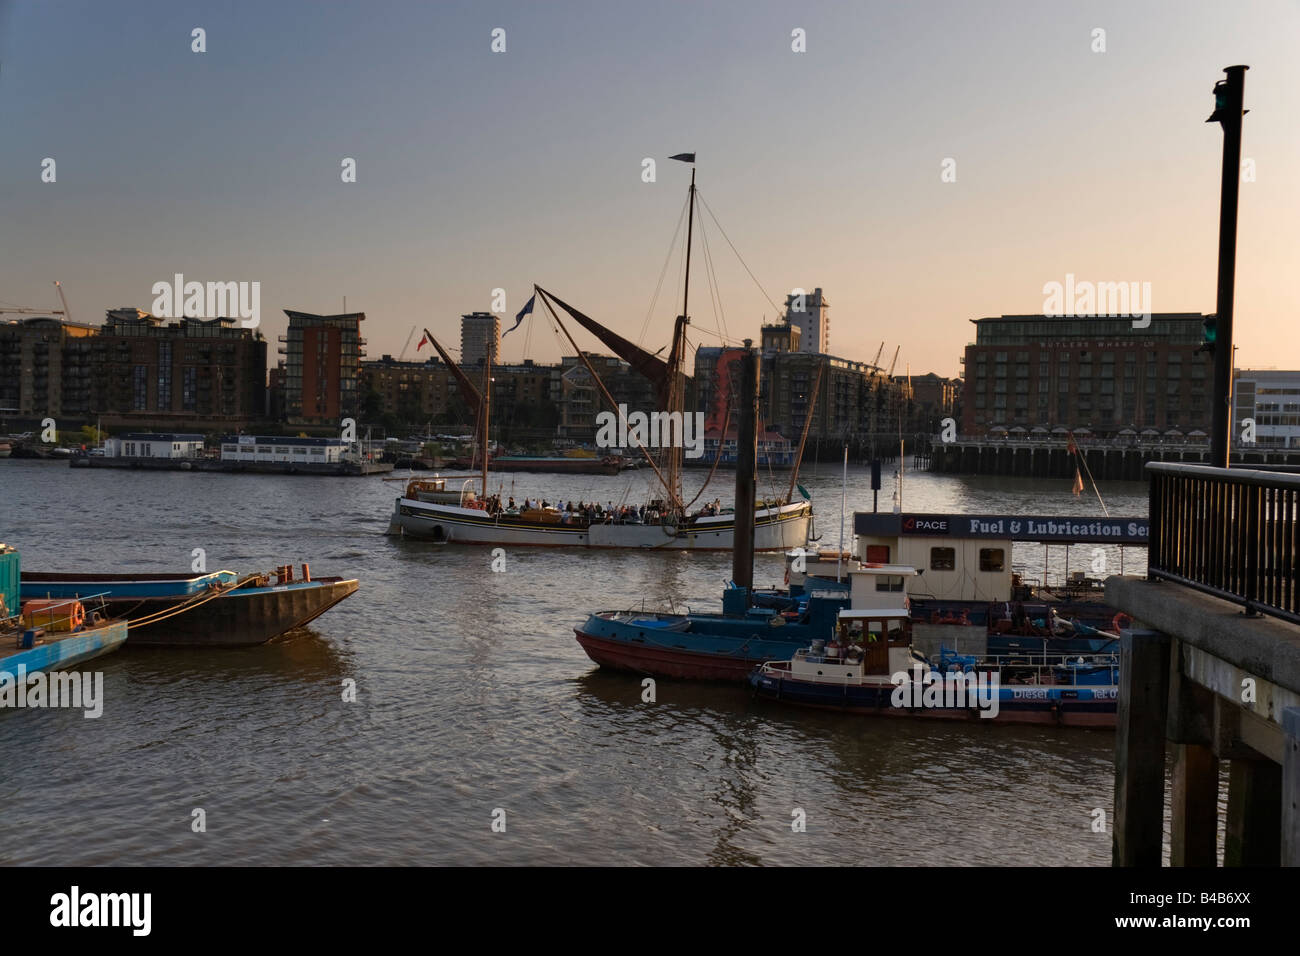 A Thames sailing barge taking Tourists up the River Thames in London in the early evening View is looking towards South London f Stock Photo